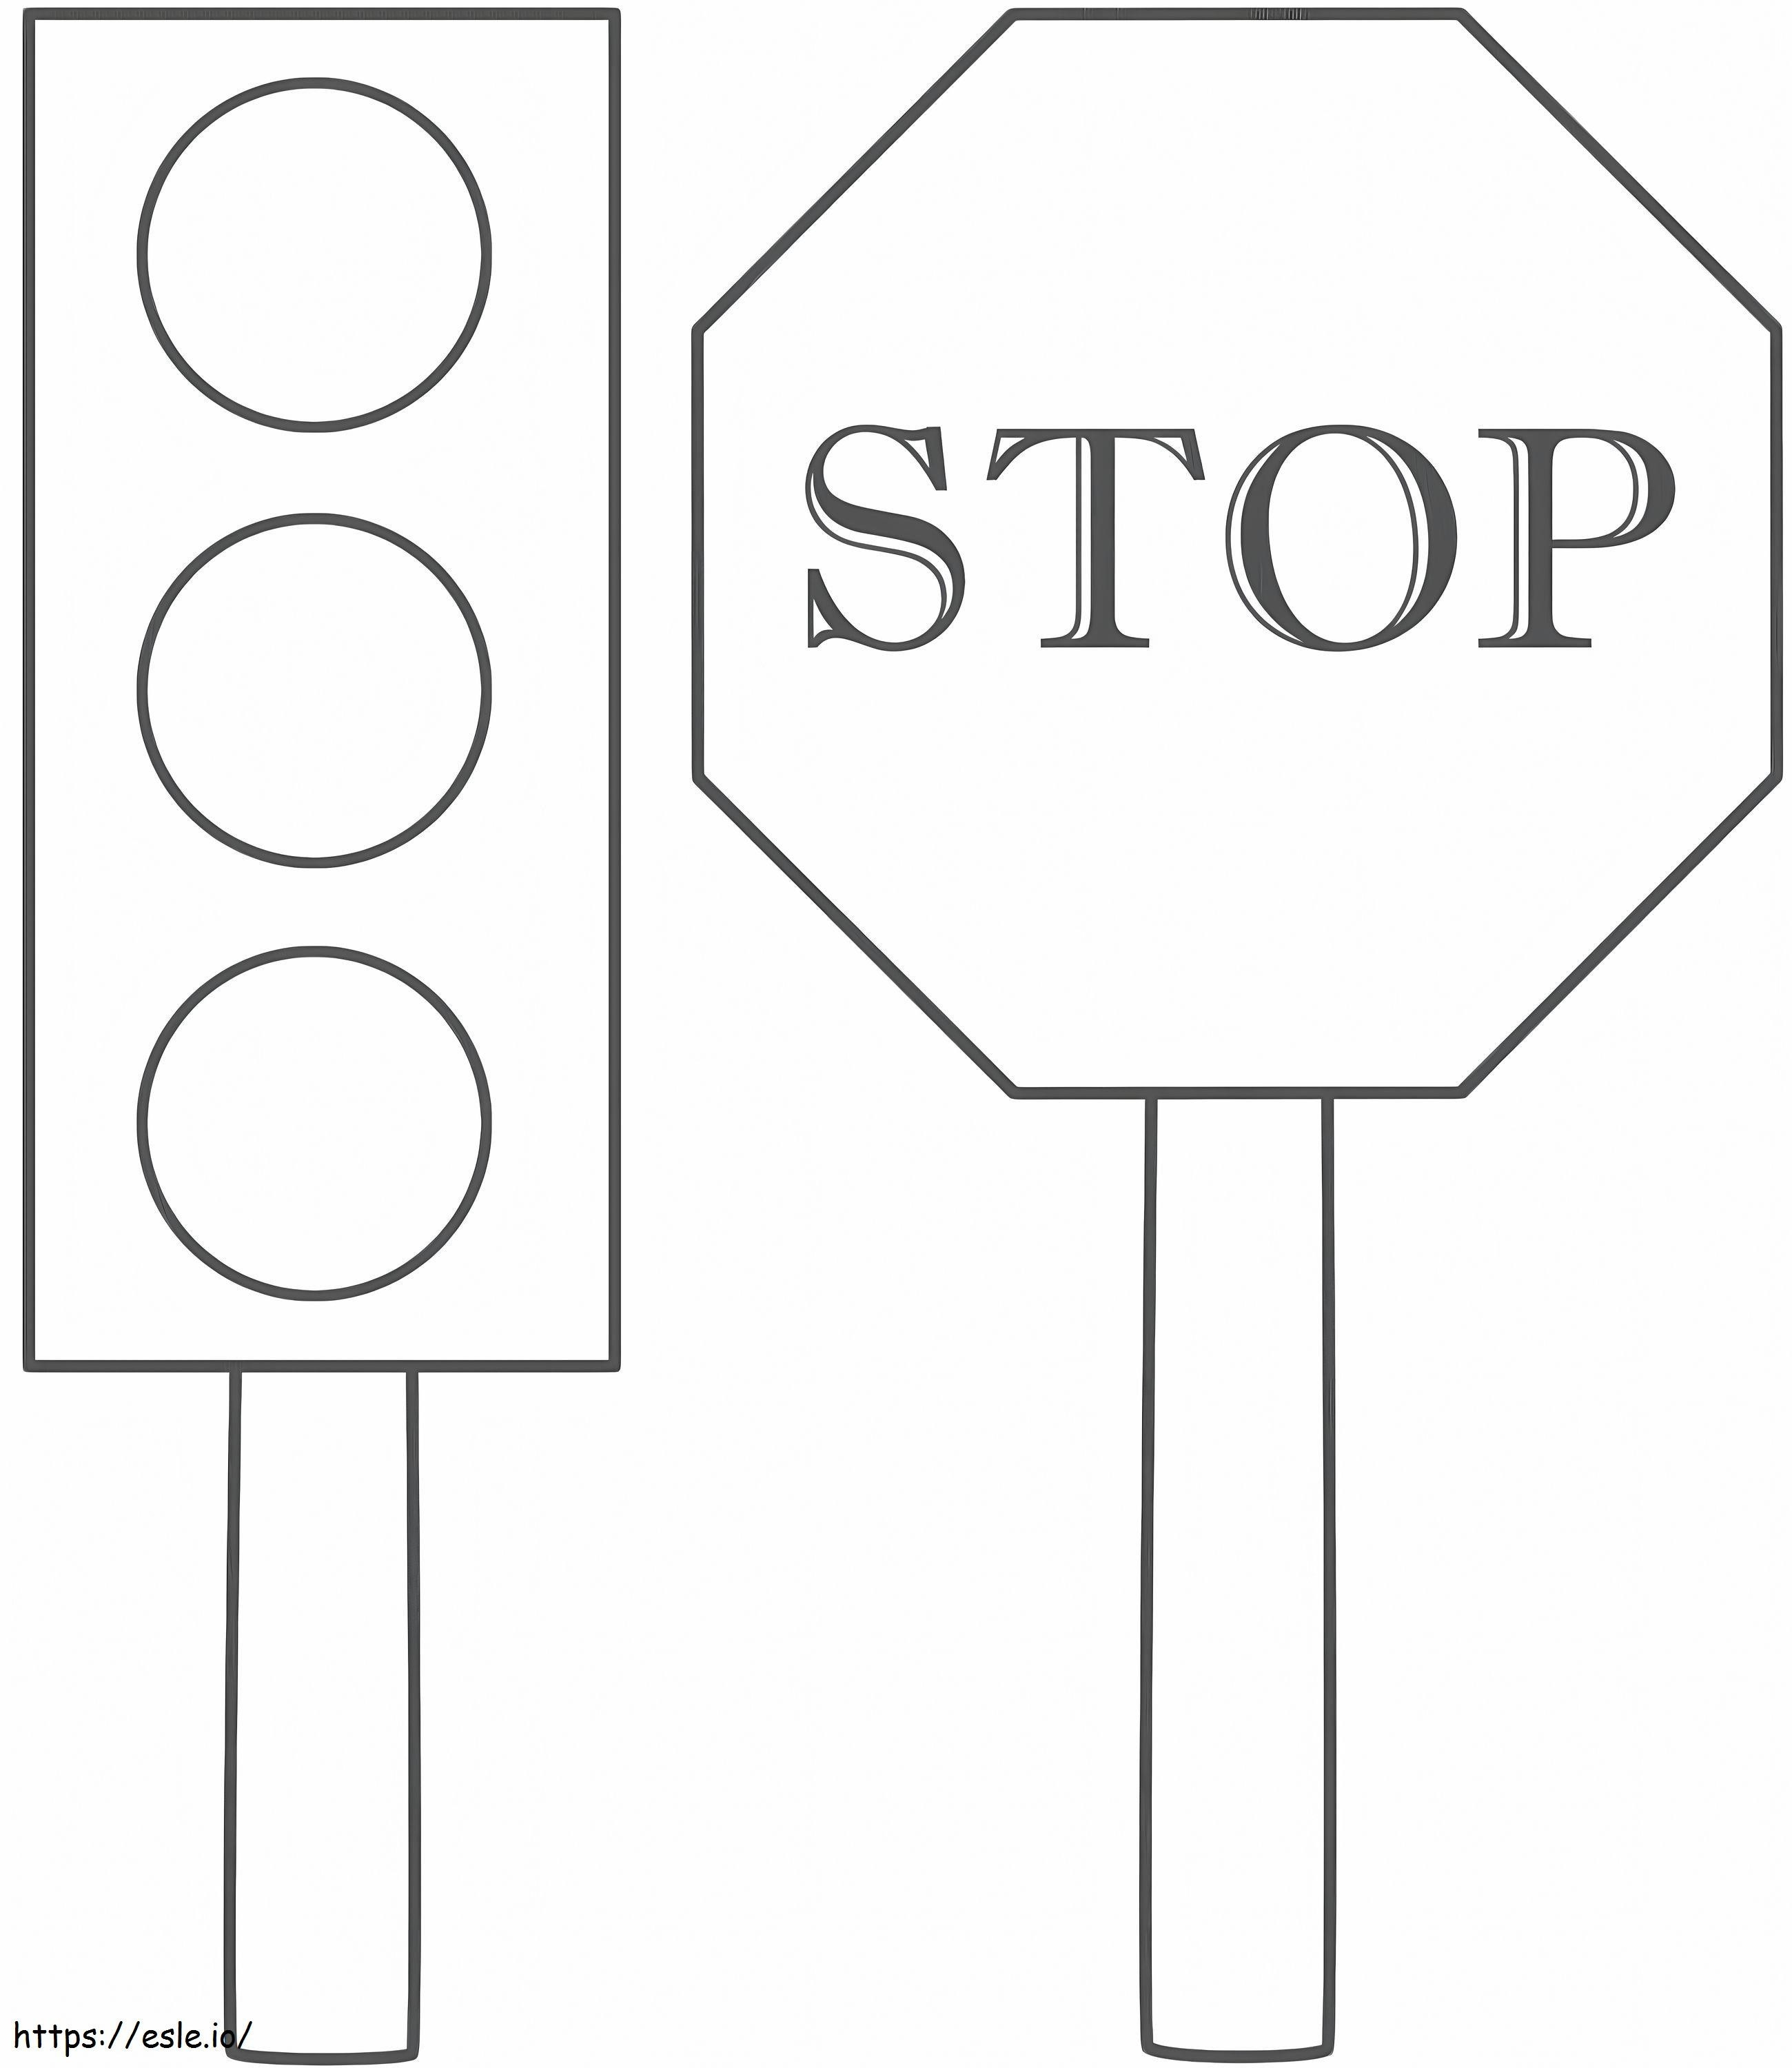 Road Safety Stop Sign coloring page